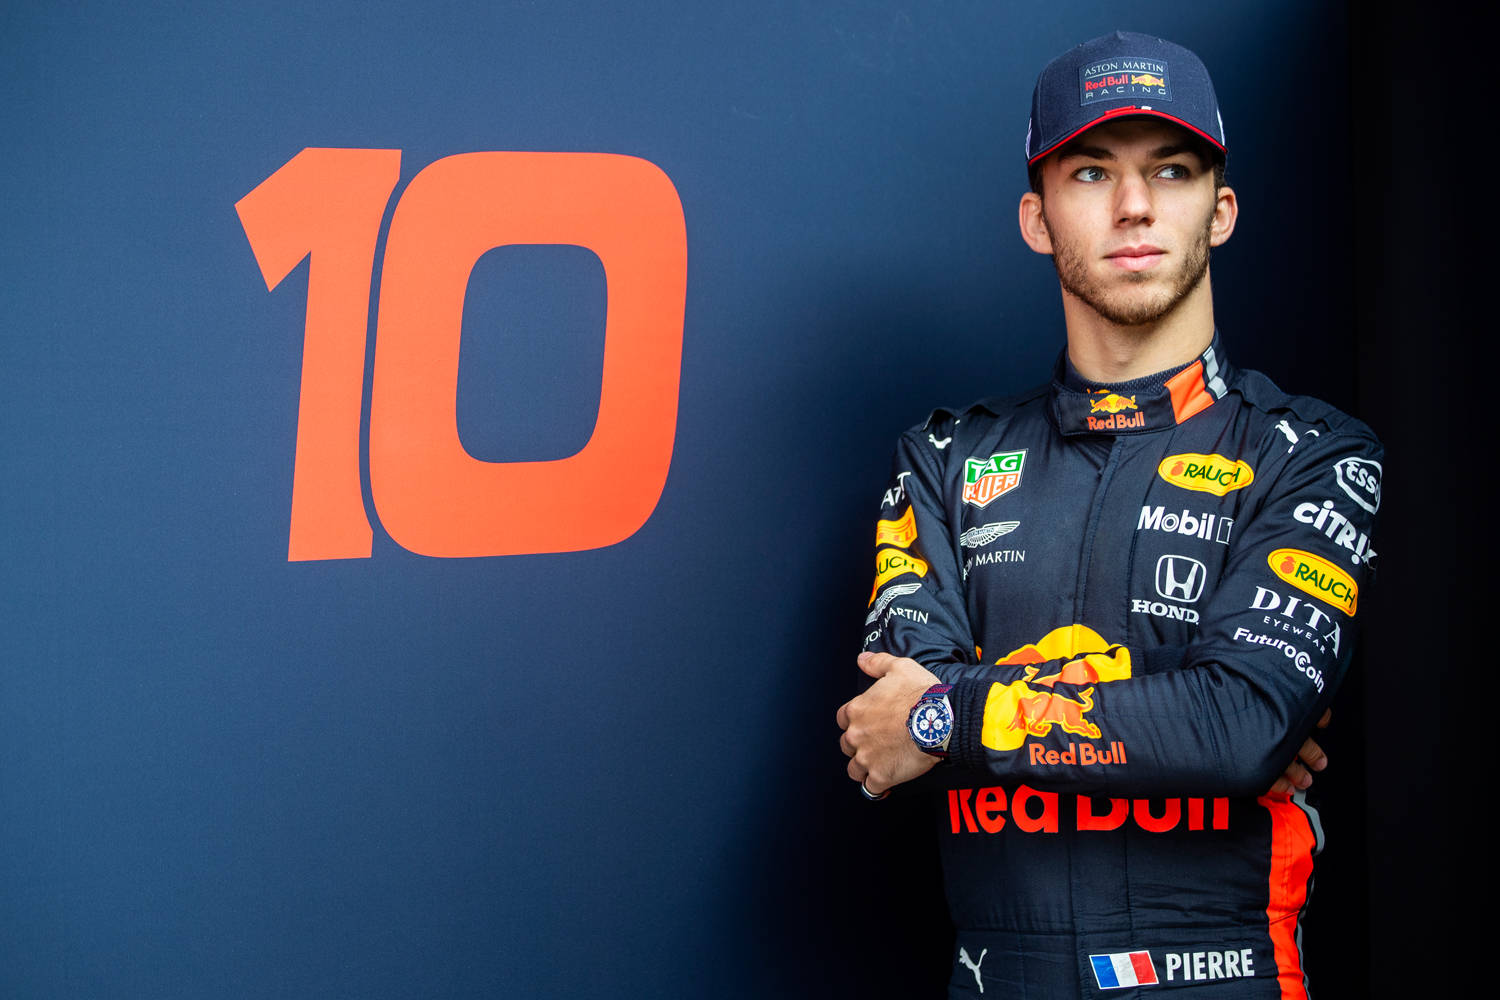 Pierre Gasly Striking A Pose Beside His Race Car Background